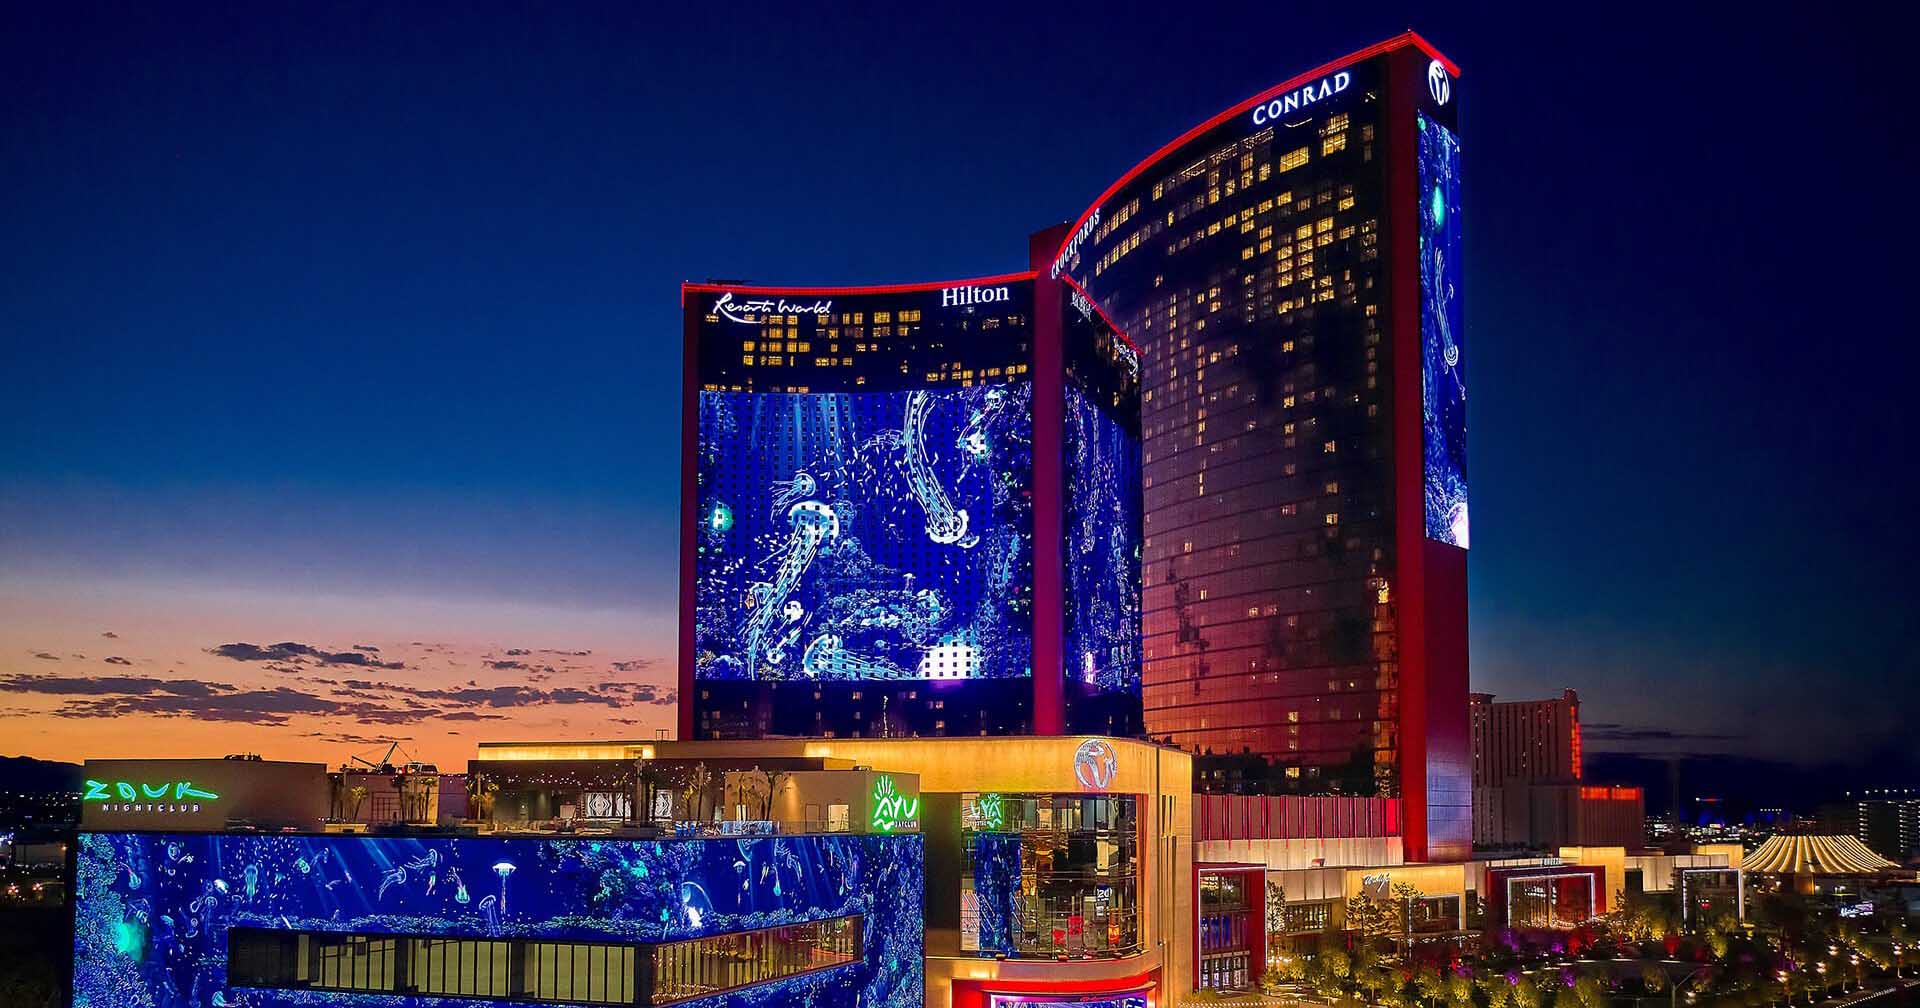 Resorts World Las Vegas hotels - Also home to a large luxury casino